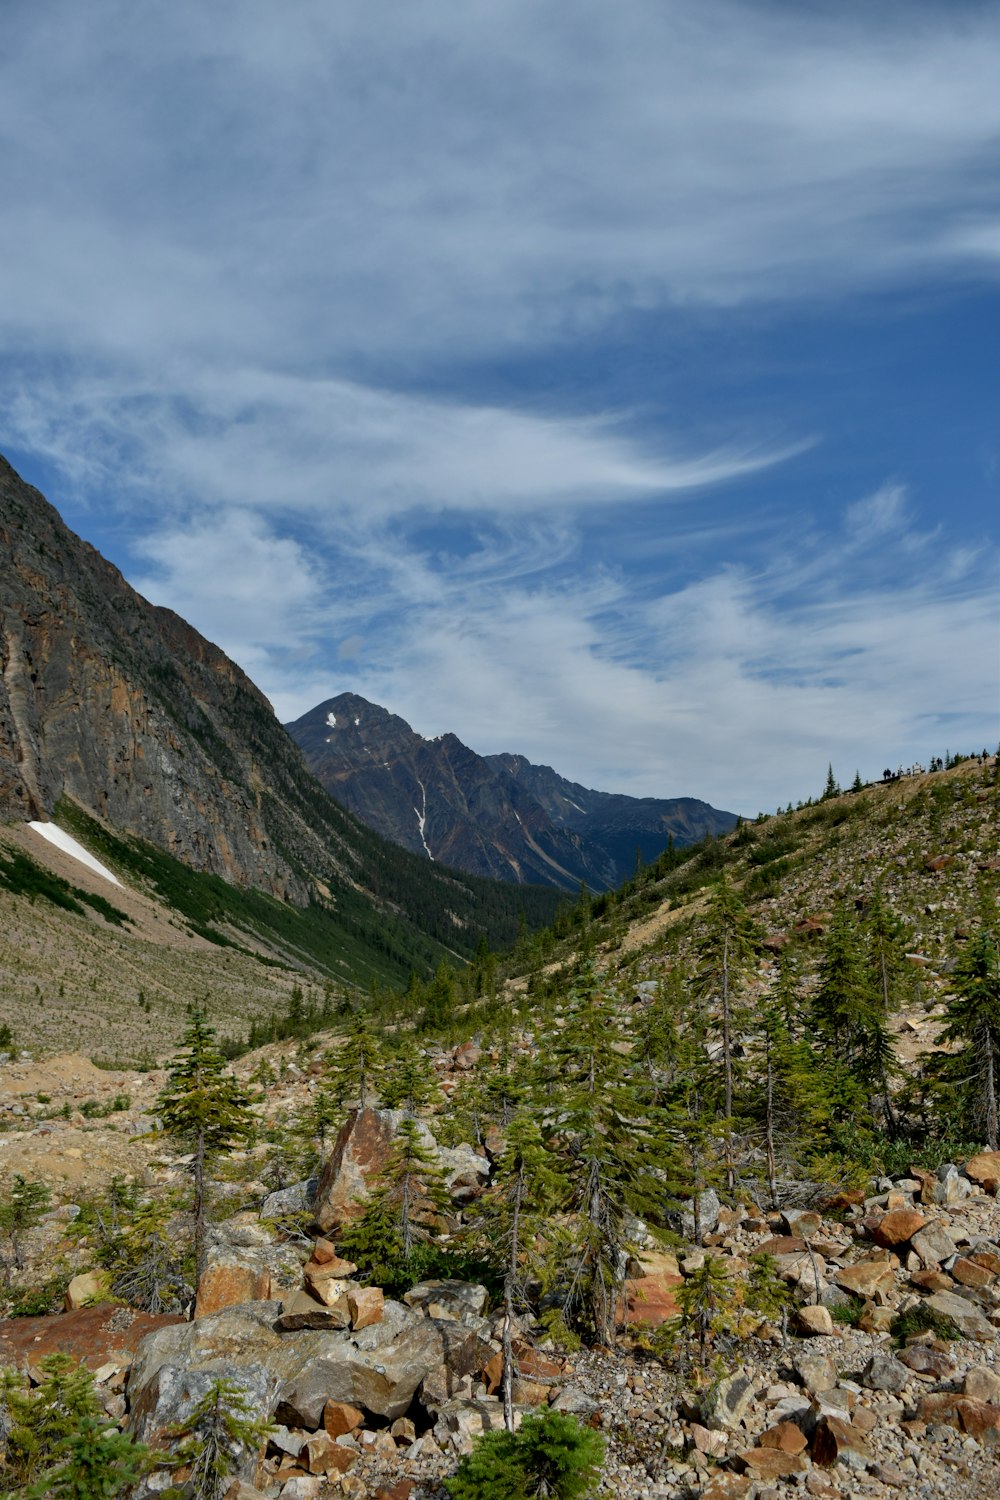 a view of a mountain range with rocks and trees in the foreground